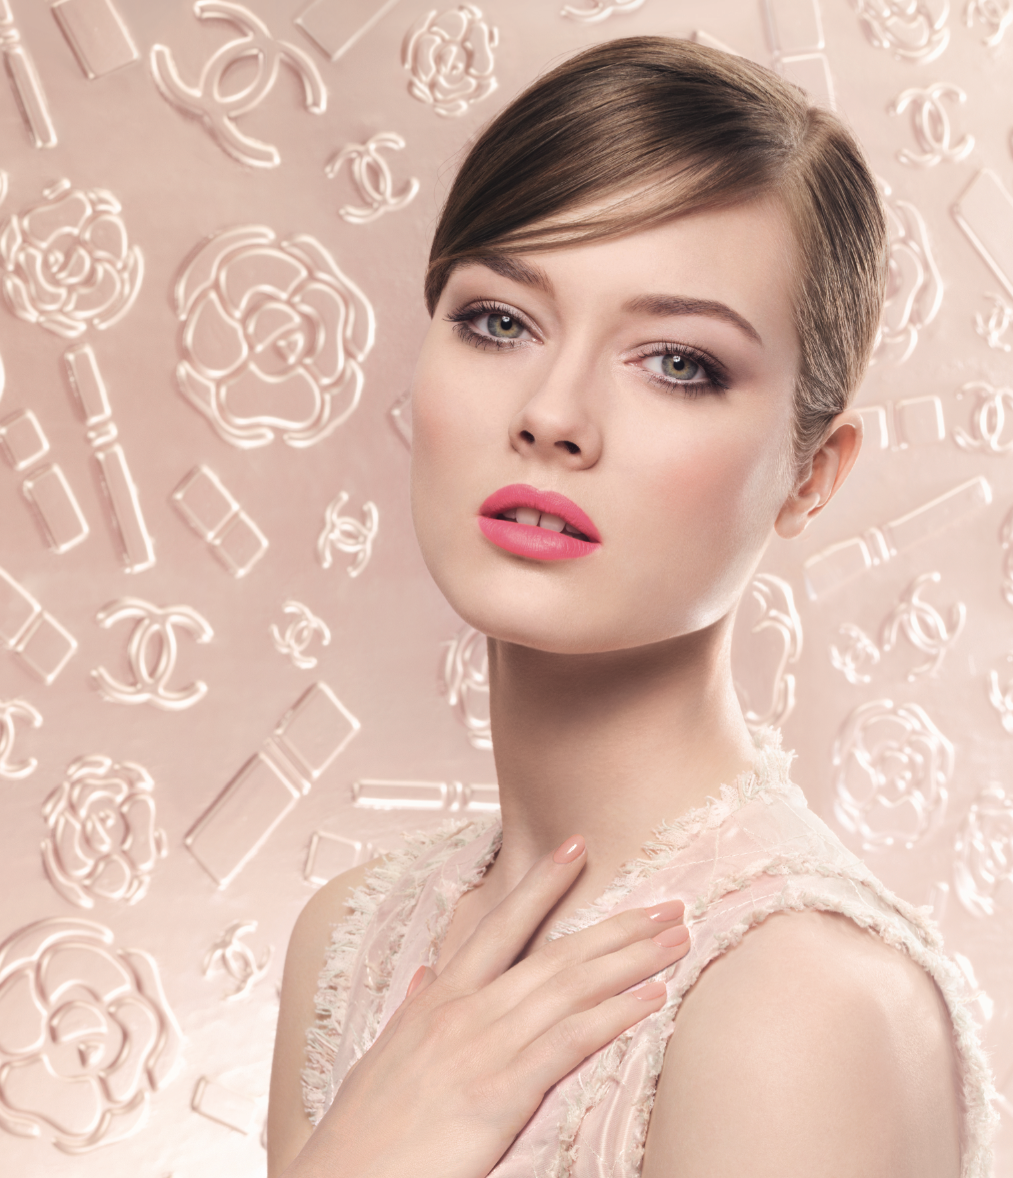 New This Week: Chanel Spring Collection 2013 - Fleur De Force